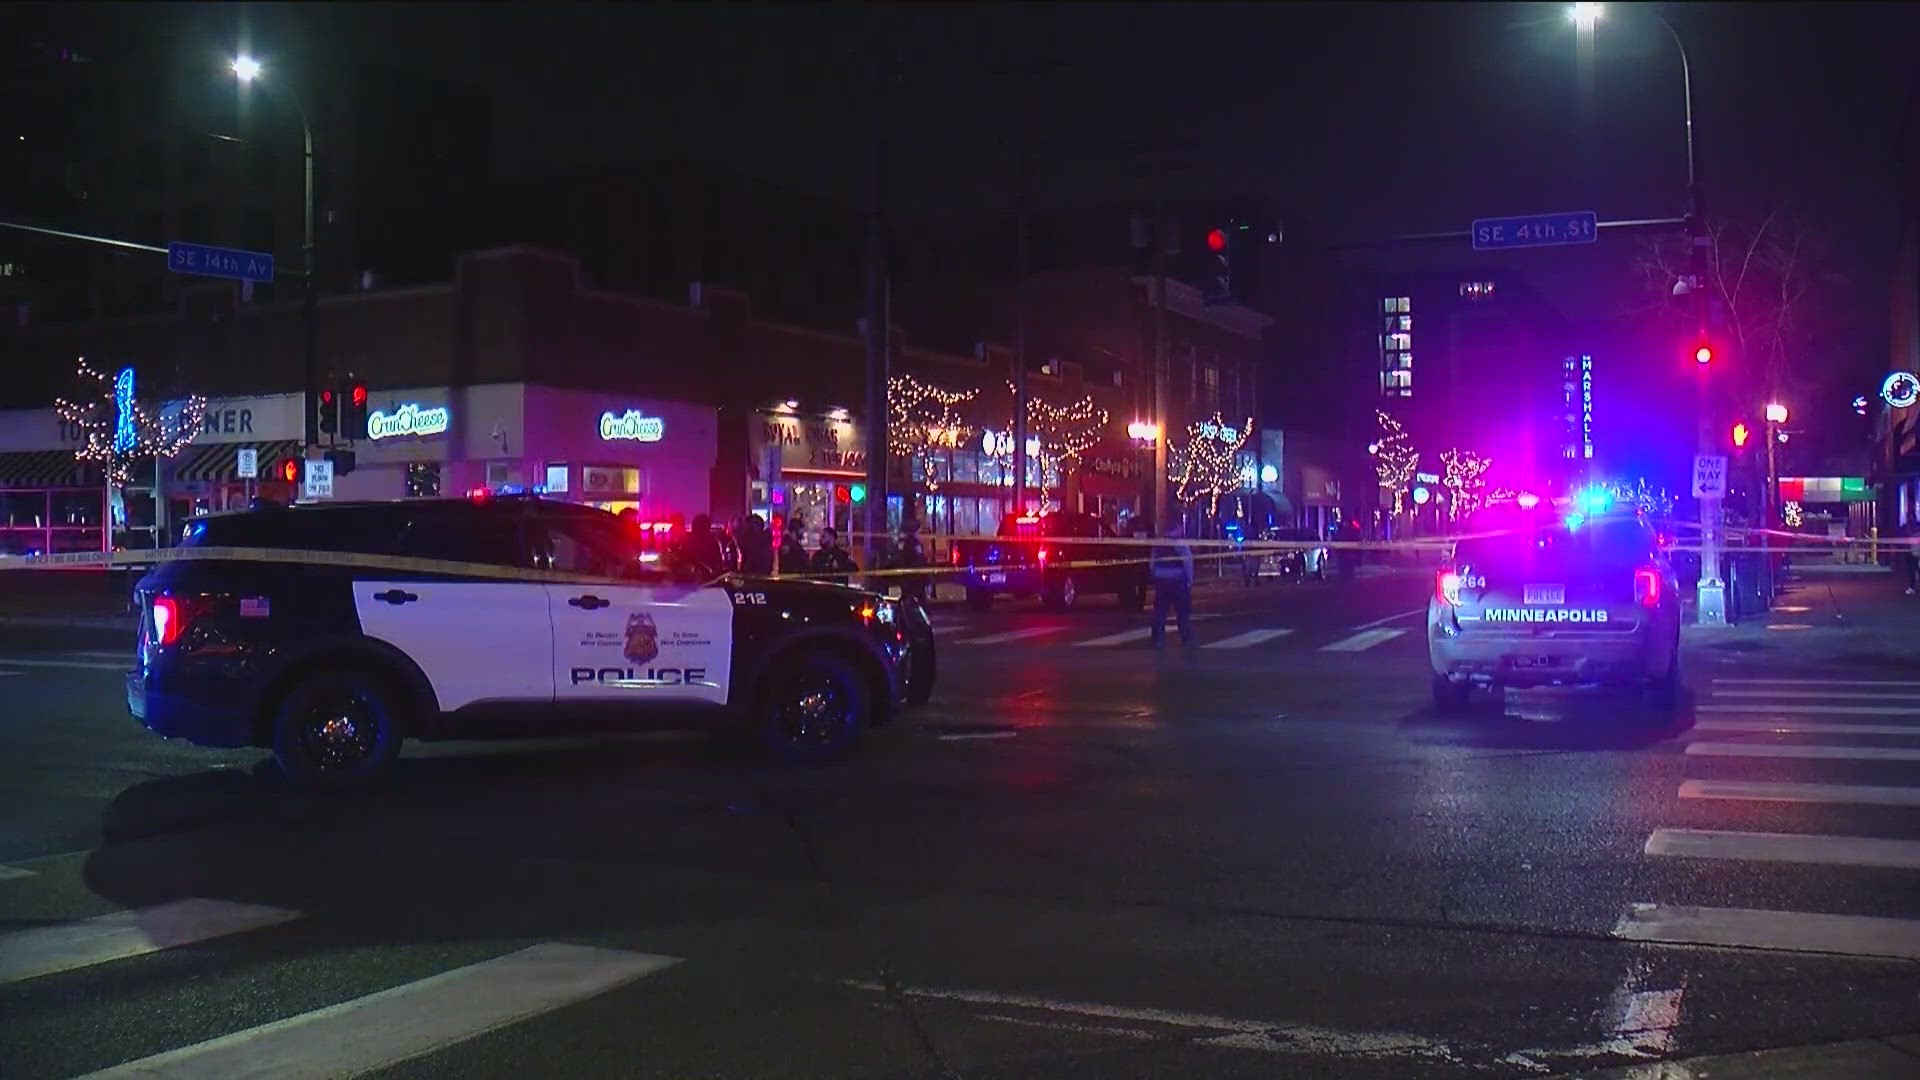 The shootings were all separate incidents MPD responded to, starting with a double fatal shooting in Dinkytown early Sunday morning.